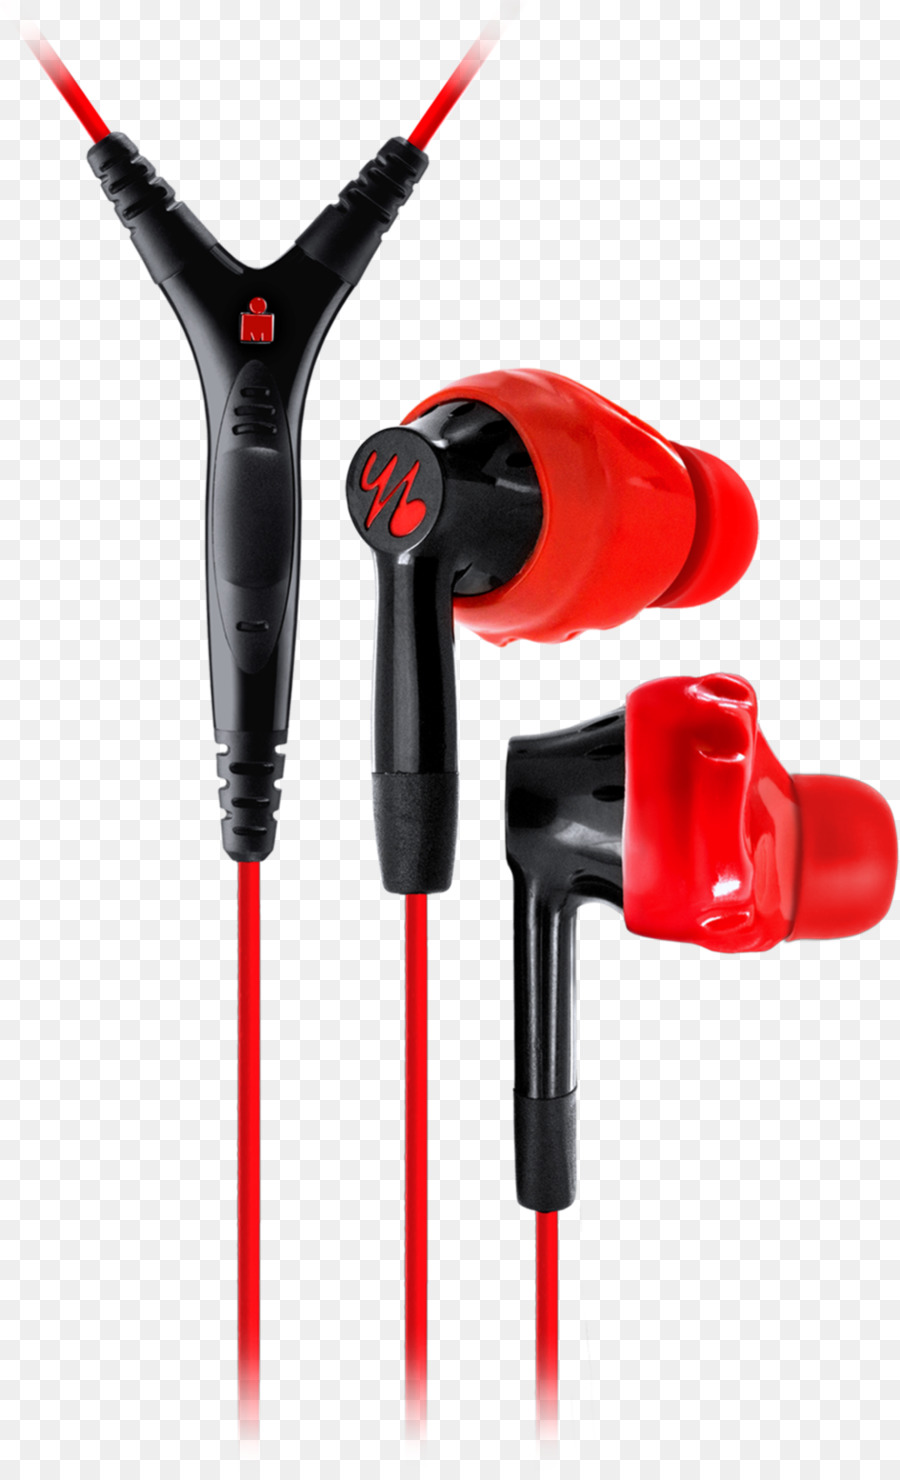 Yurbuds Menginspirasi 400，Jbl Yurbuds Menginspirasi 300 PNG